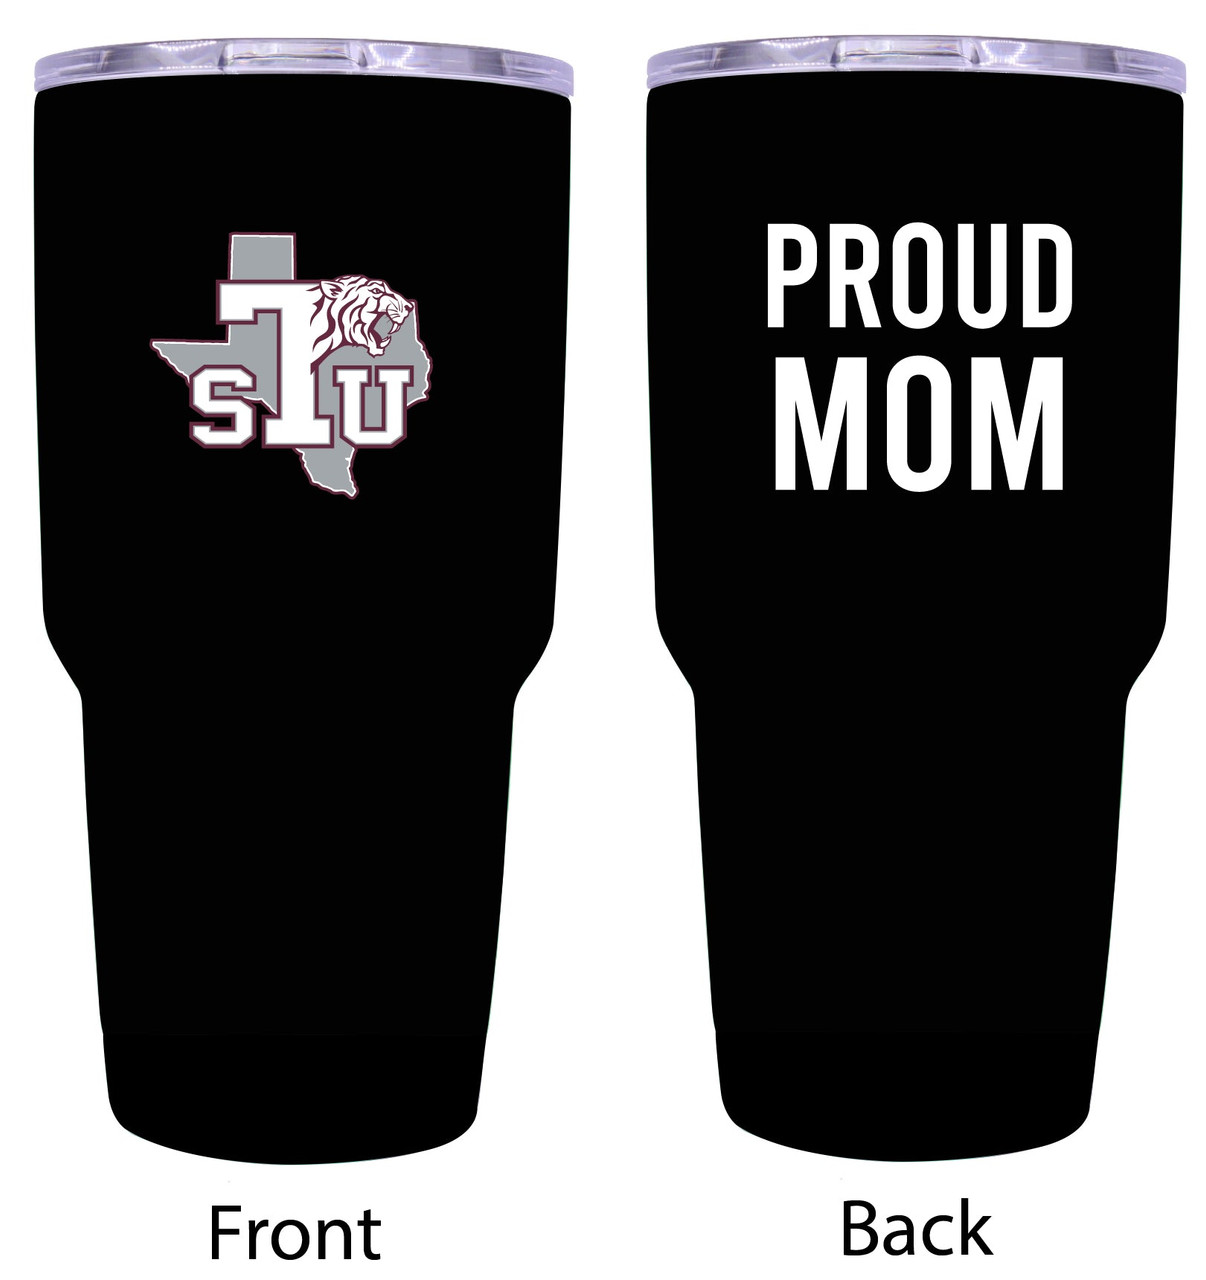 Texas Southern University Proud Mom 24 oz Insulated Stainless Steel Tumblers Black.